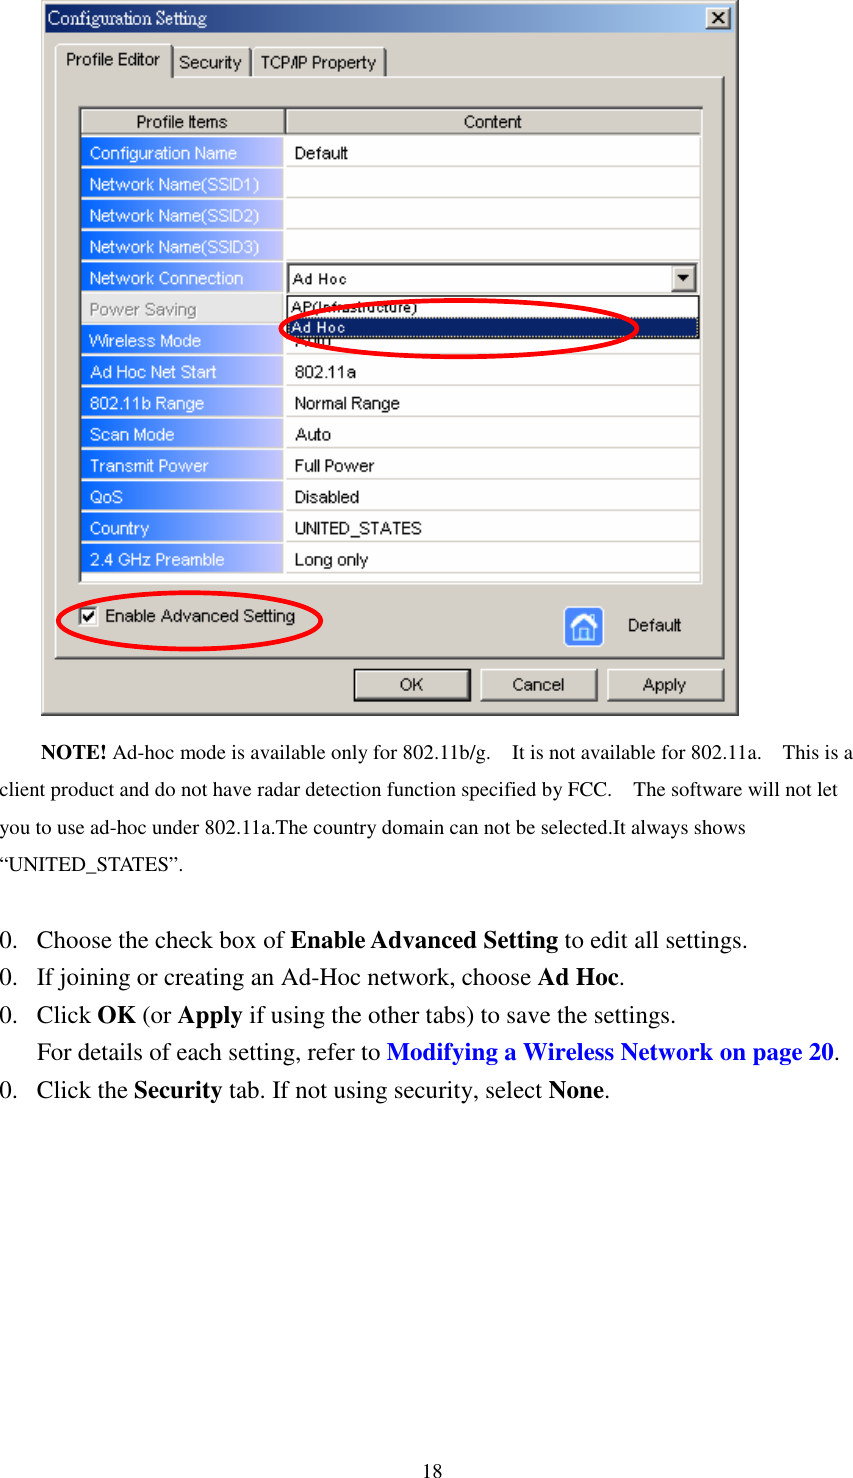   18 NOTE! Ad-hoc mode is available only for 802.11b/g.    It is not available for 802.11a.    This is a client product and do not have radar detection function specified by FCC.    The software will not let you to use ad-hoc under 802.11a.The country domain can not be selected.It always shows “UNITED_STATES”.    0. Choose the check box of Enable Advanced Setting to edit all settings.   0. If joining or creating an Ad-Hoc network, choose Ad Hoc. 0. Click OK (or Apply if using the other tabs) to save the settings. For details of each setting, refer to Modifying a Wireless Network on page 20. 0. Click the Security tab. If not using security, select None. 